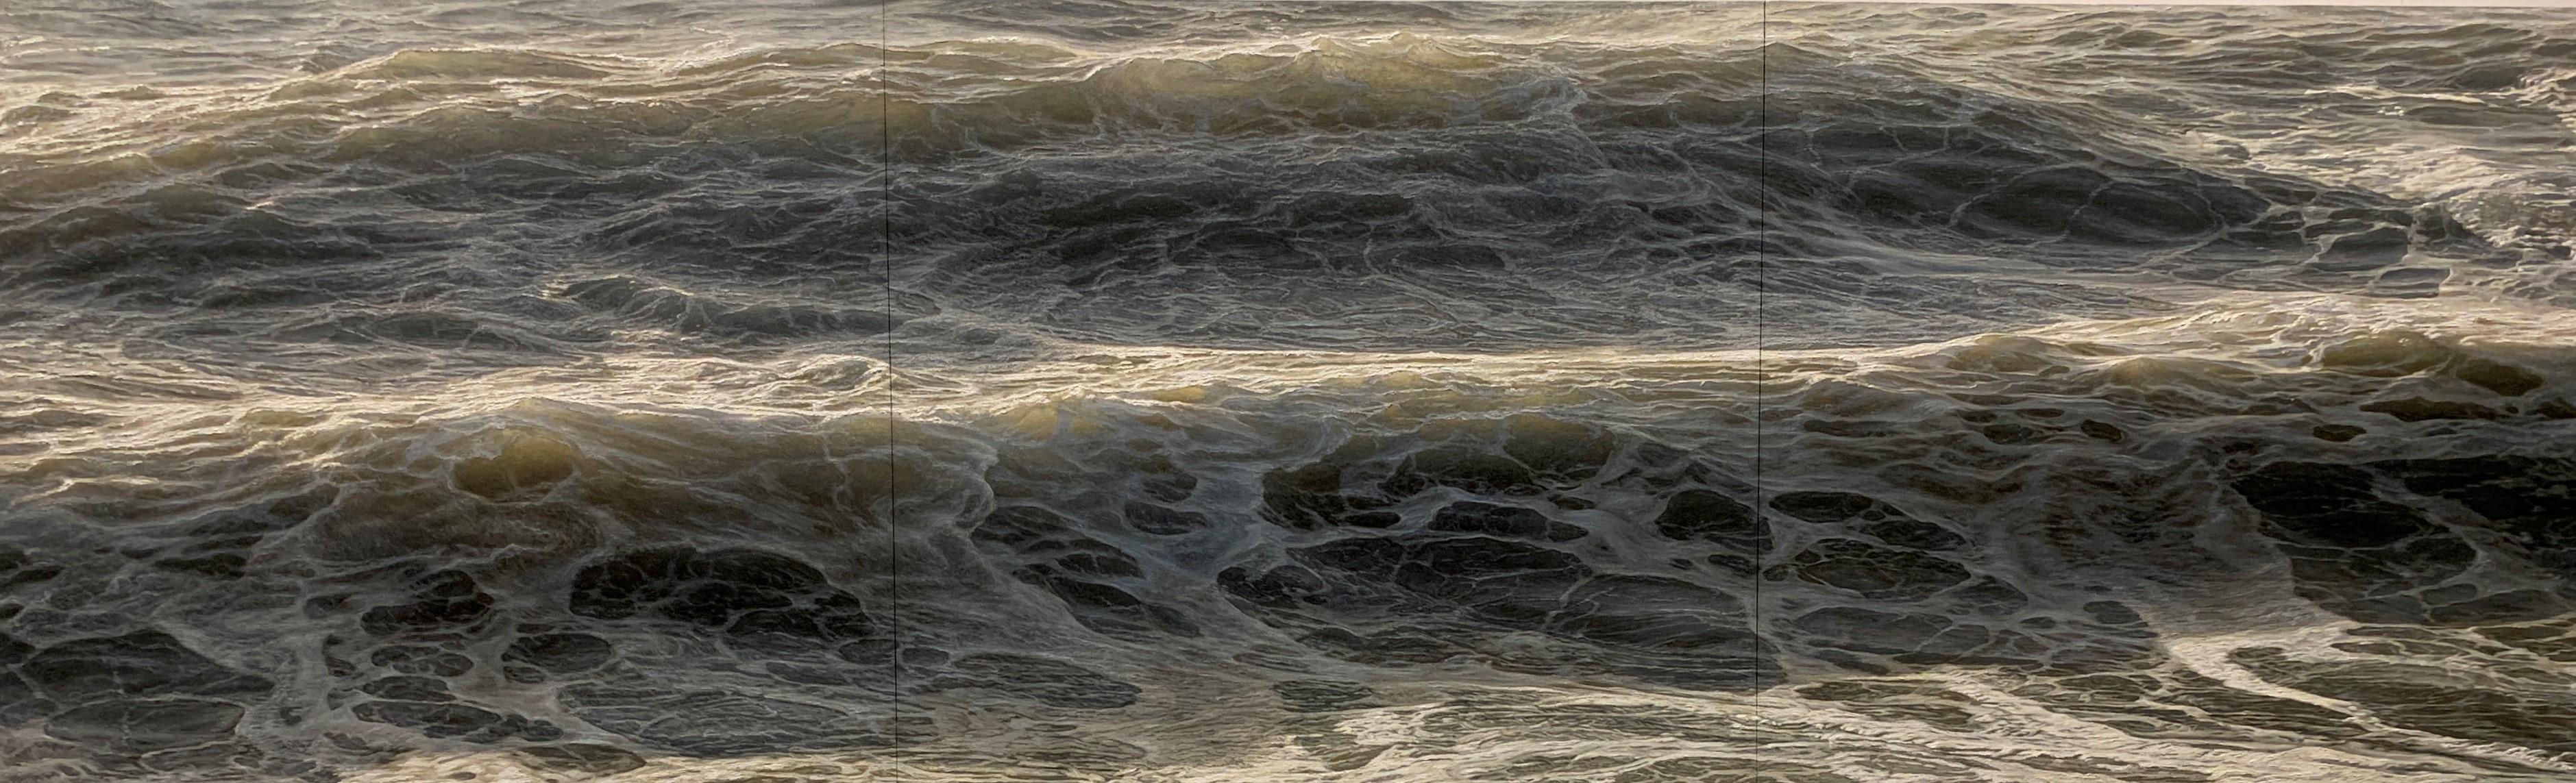 Element No. 2 - Painting by Ran Ortner